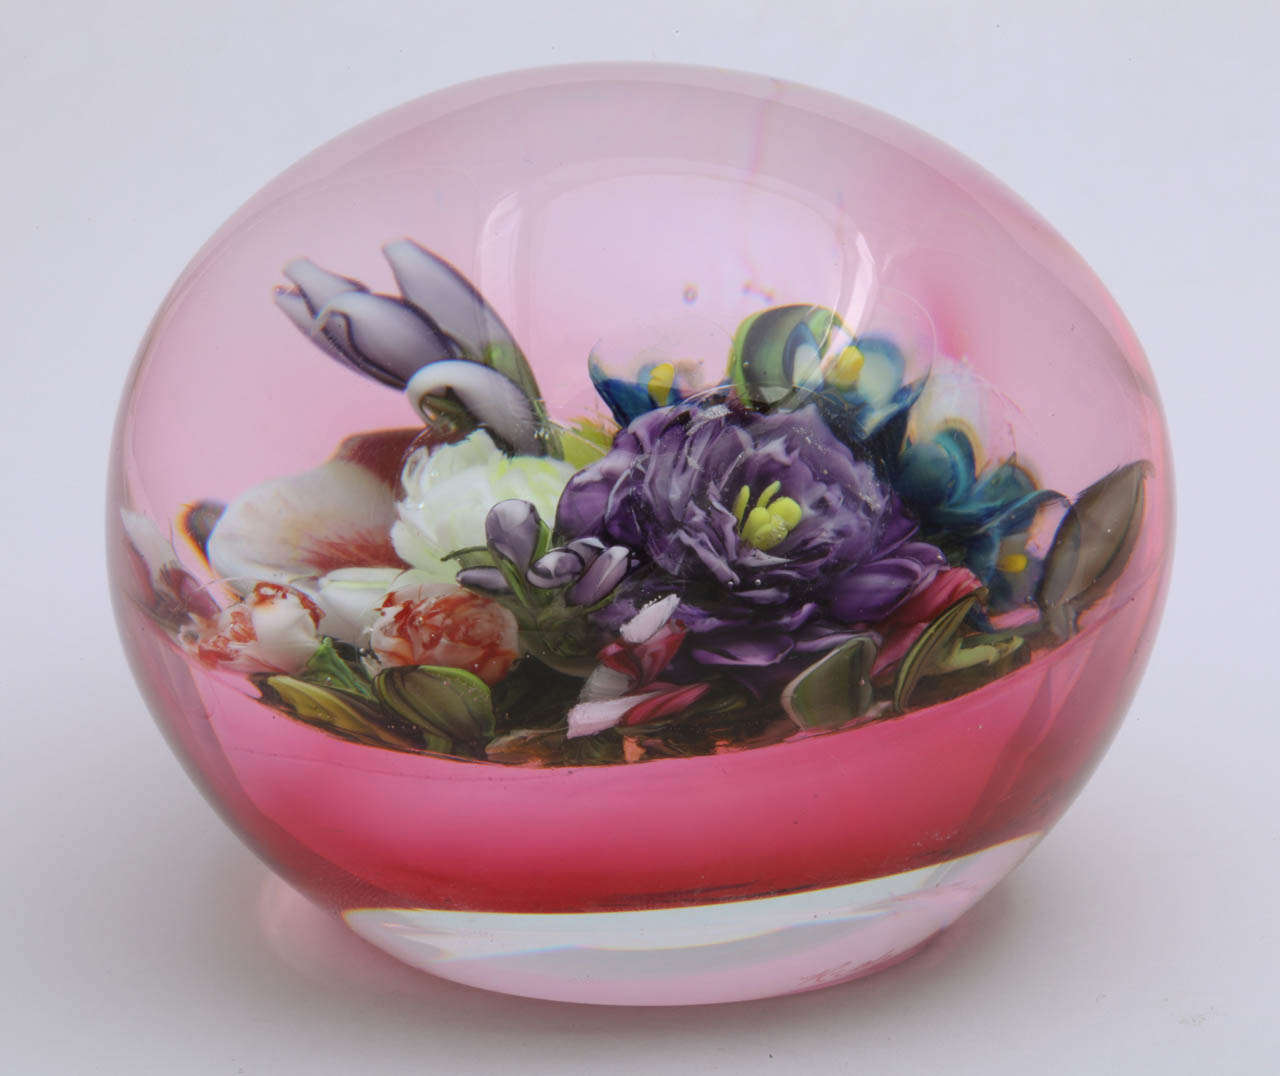 A beautiful Rick Ayotte bouquet paperweight from the 